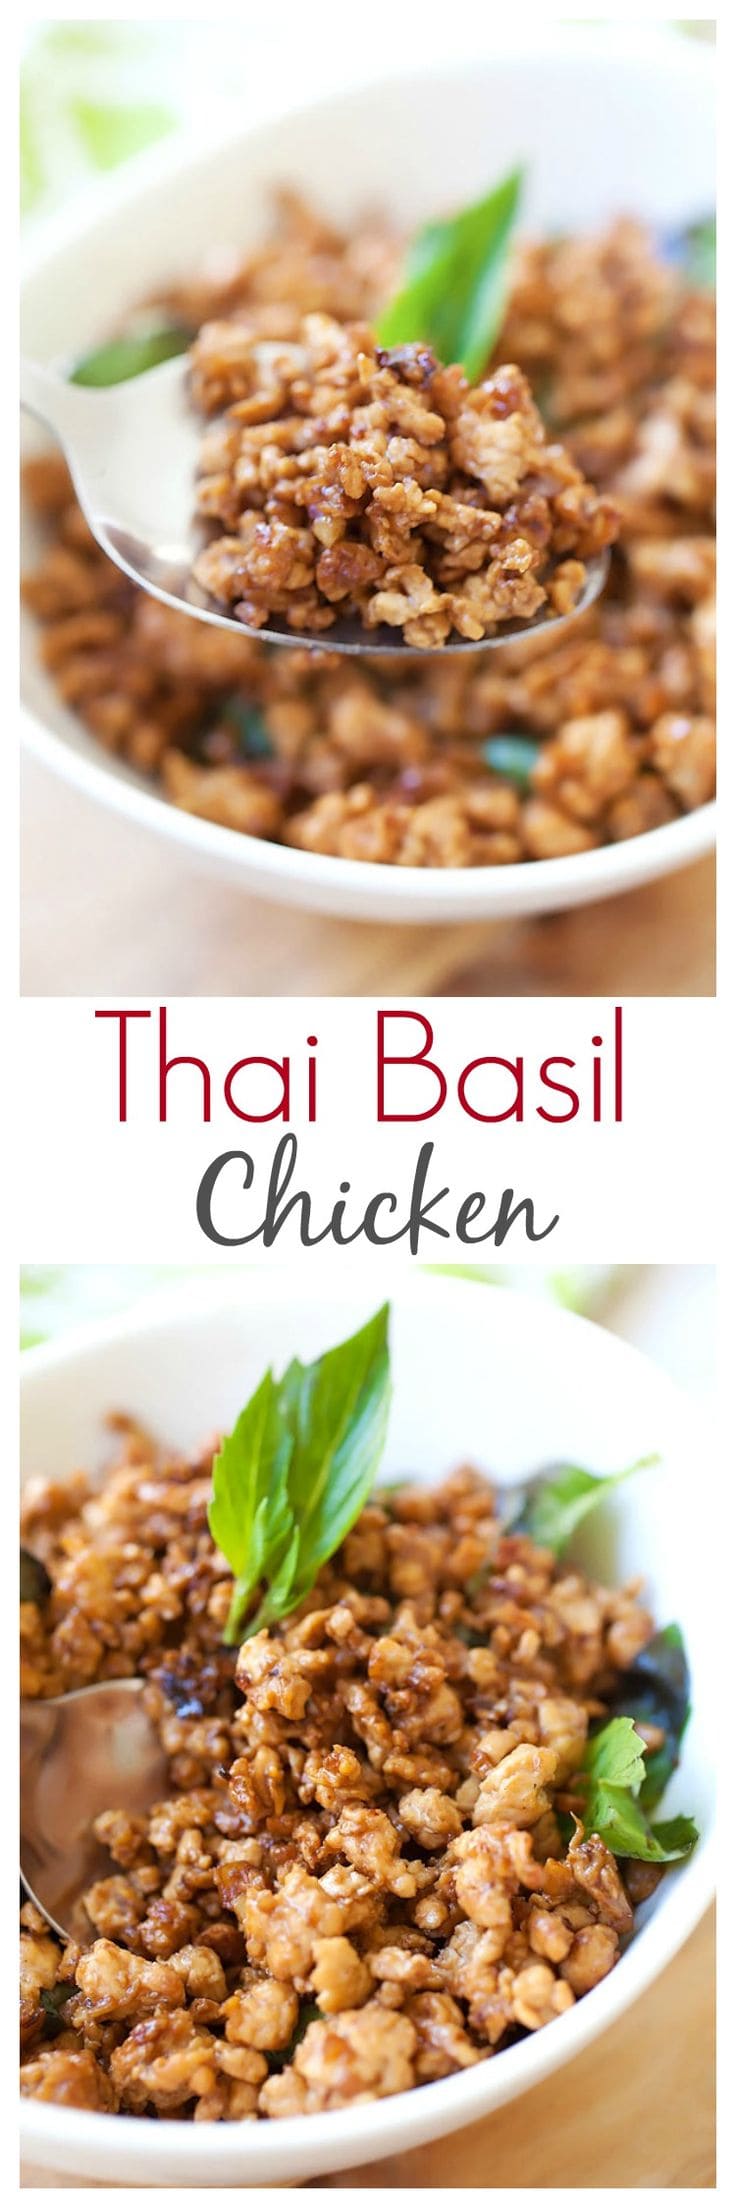 Thai Basil Chicken – made with ground chicken, basil leaves, and chilies. Basil chicken is great with rice and this recipe is super easy and authentic | rasamalaysia.com